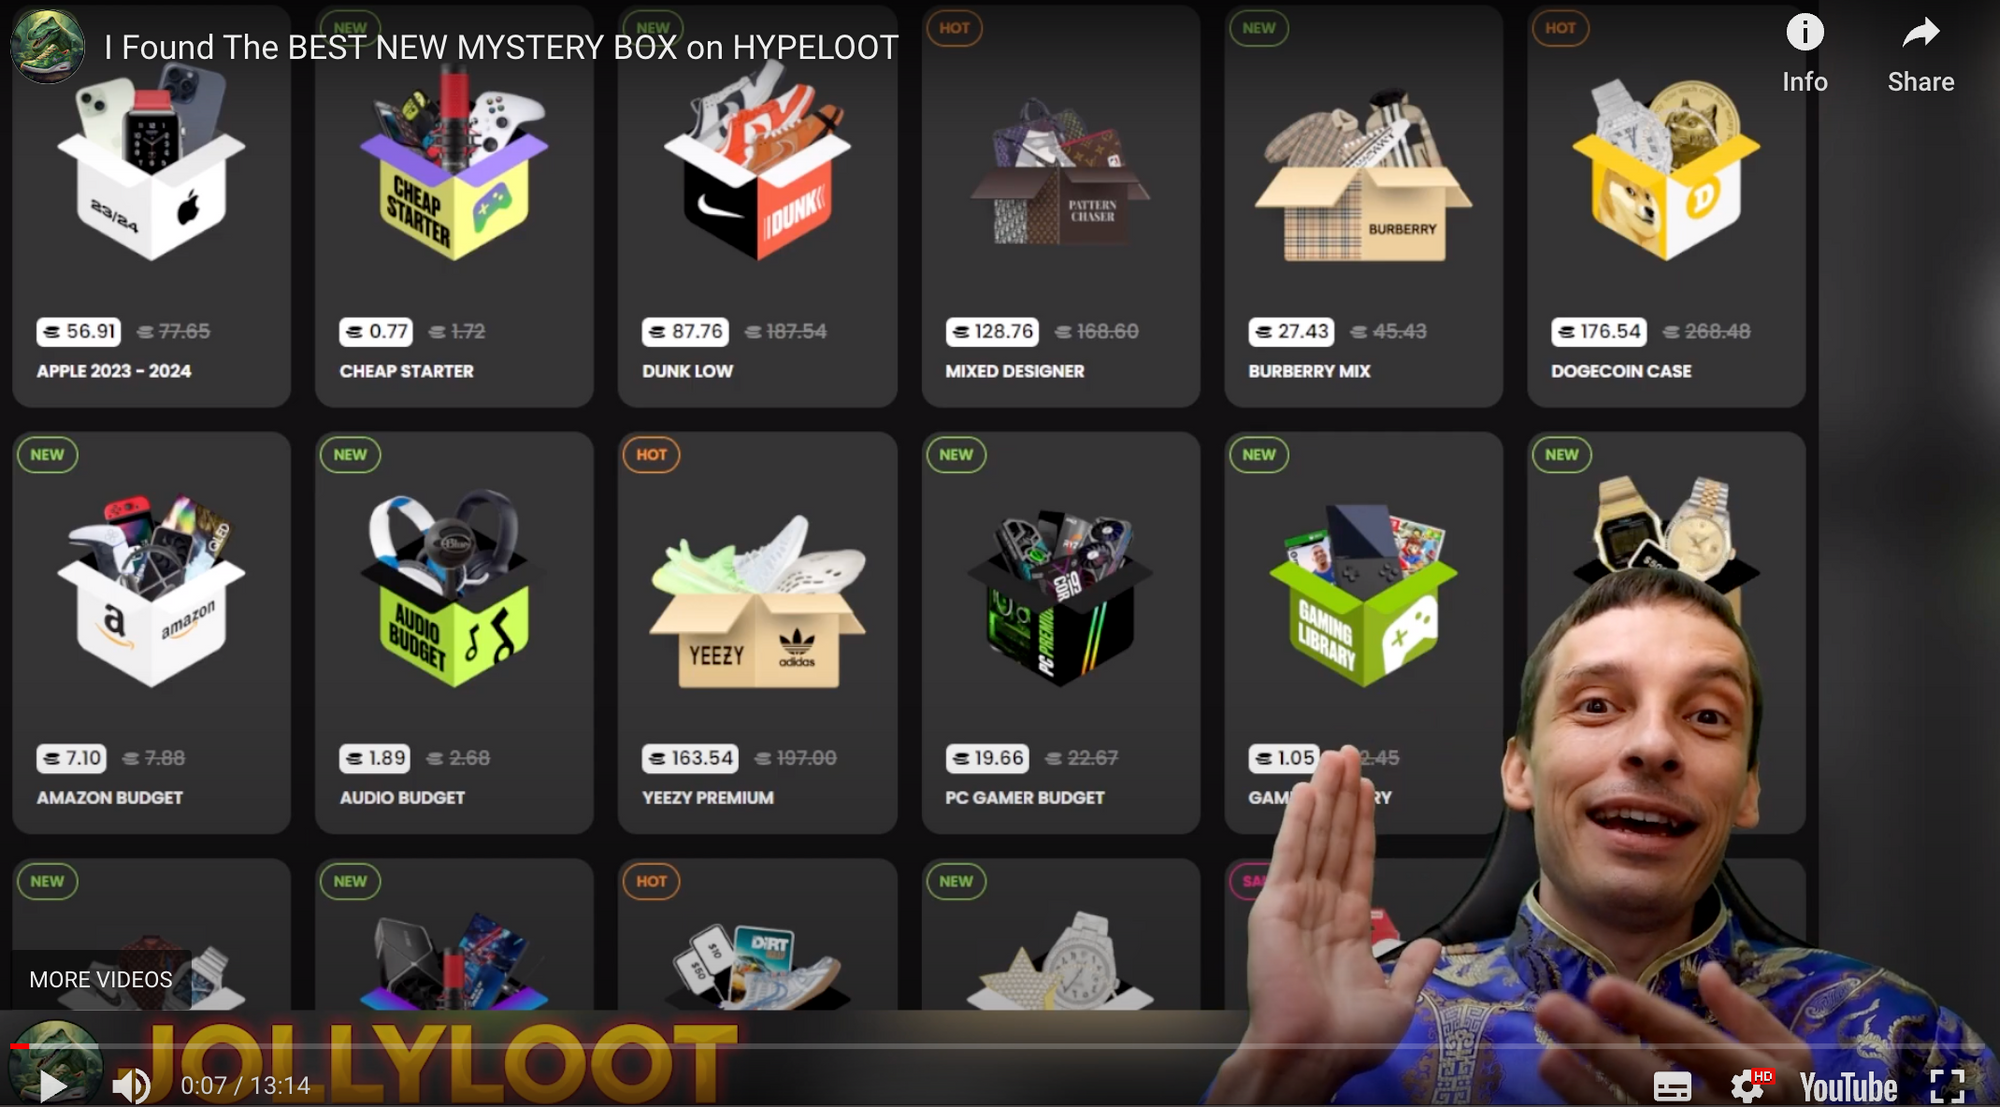 Influencer Youtube Video for Mystery Box Website HypeLoot 